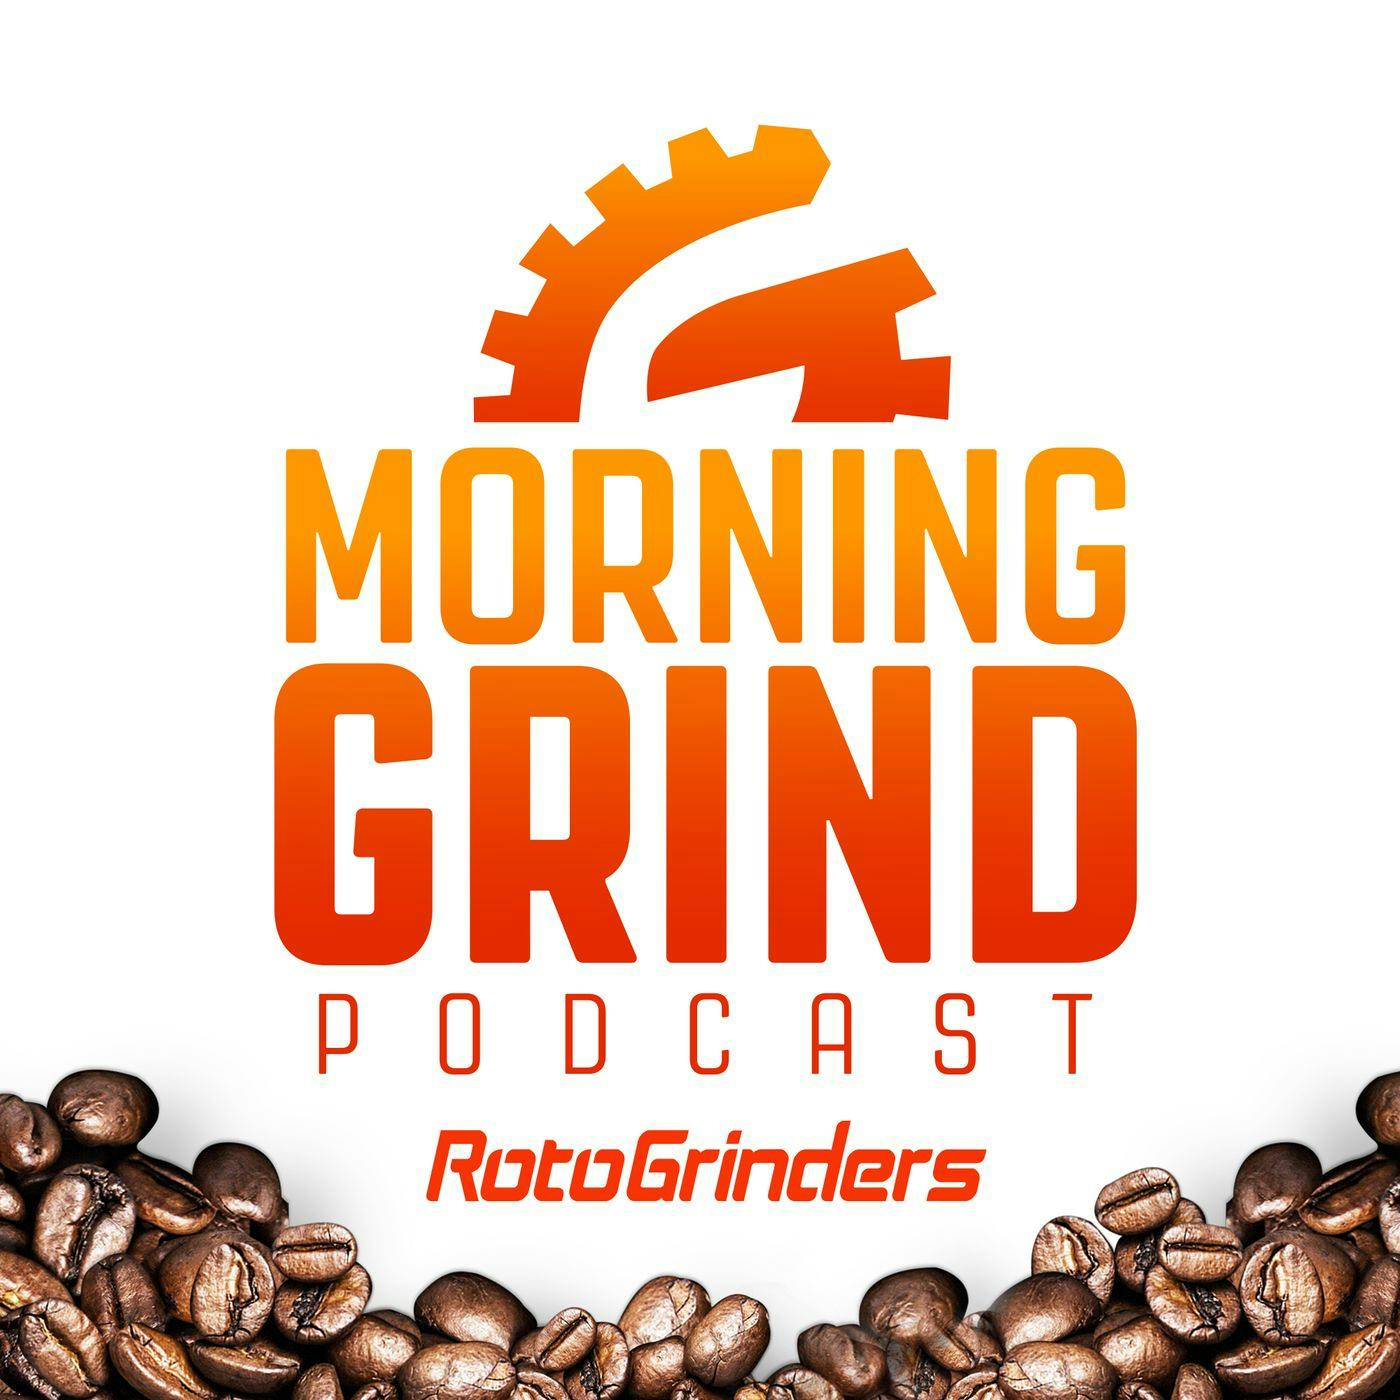 NBA Morning Grind: 4/5/2022 - Notifications Are On